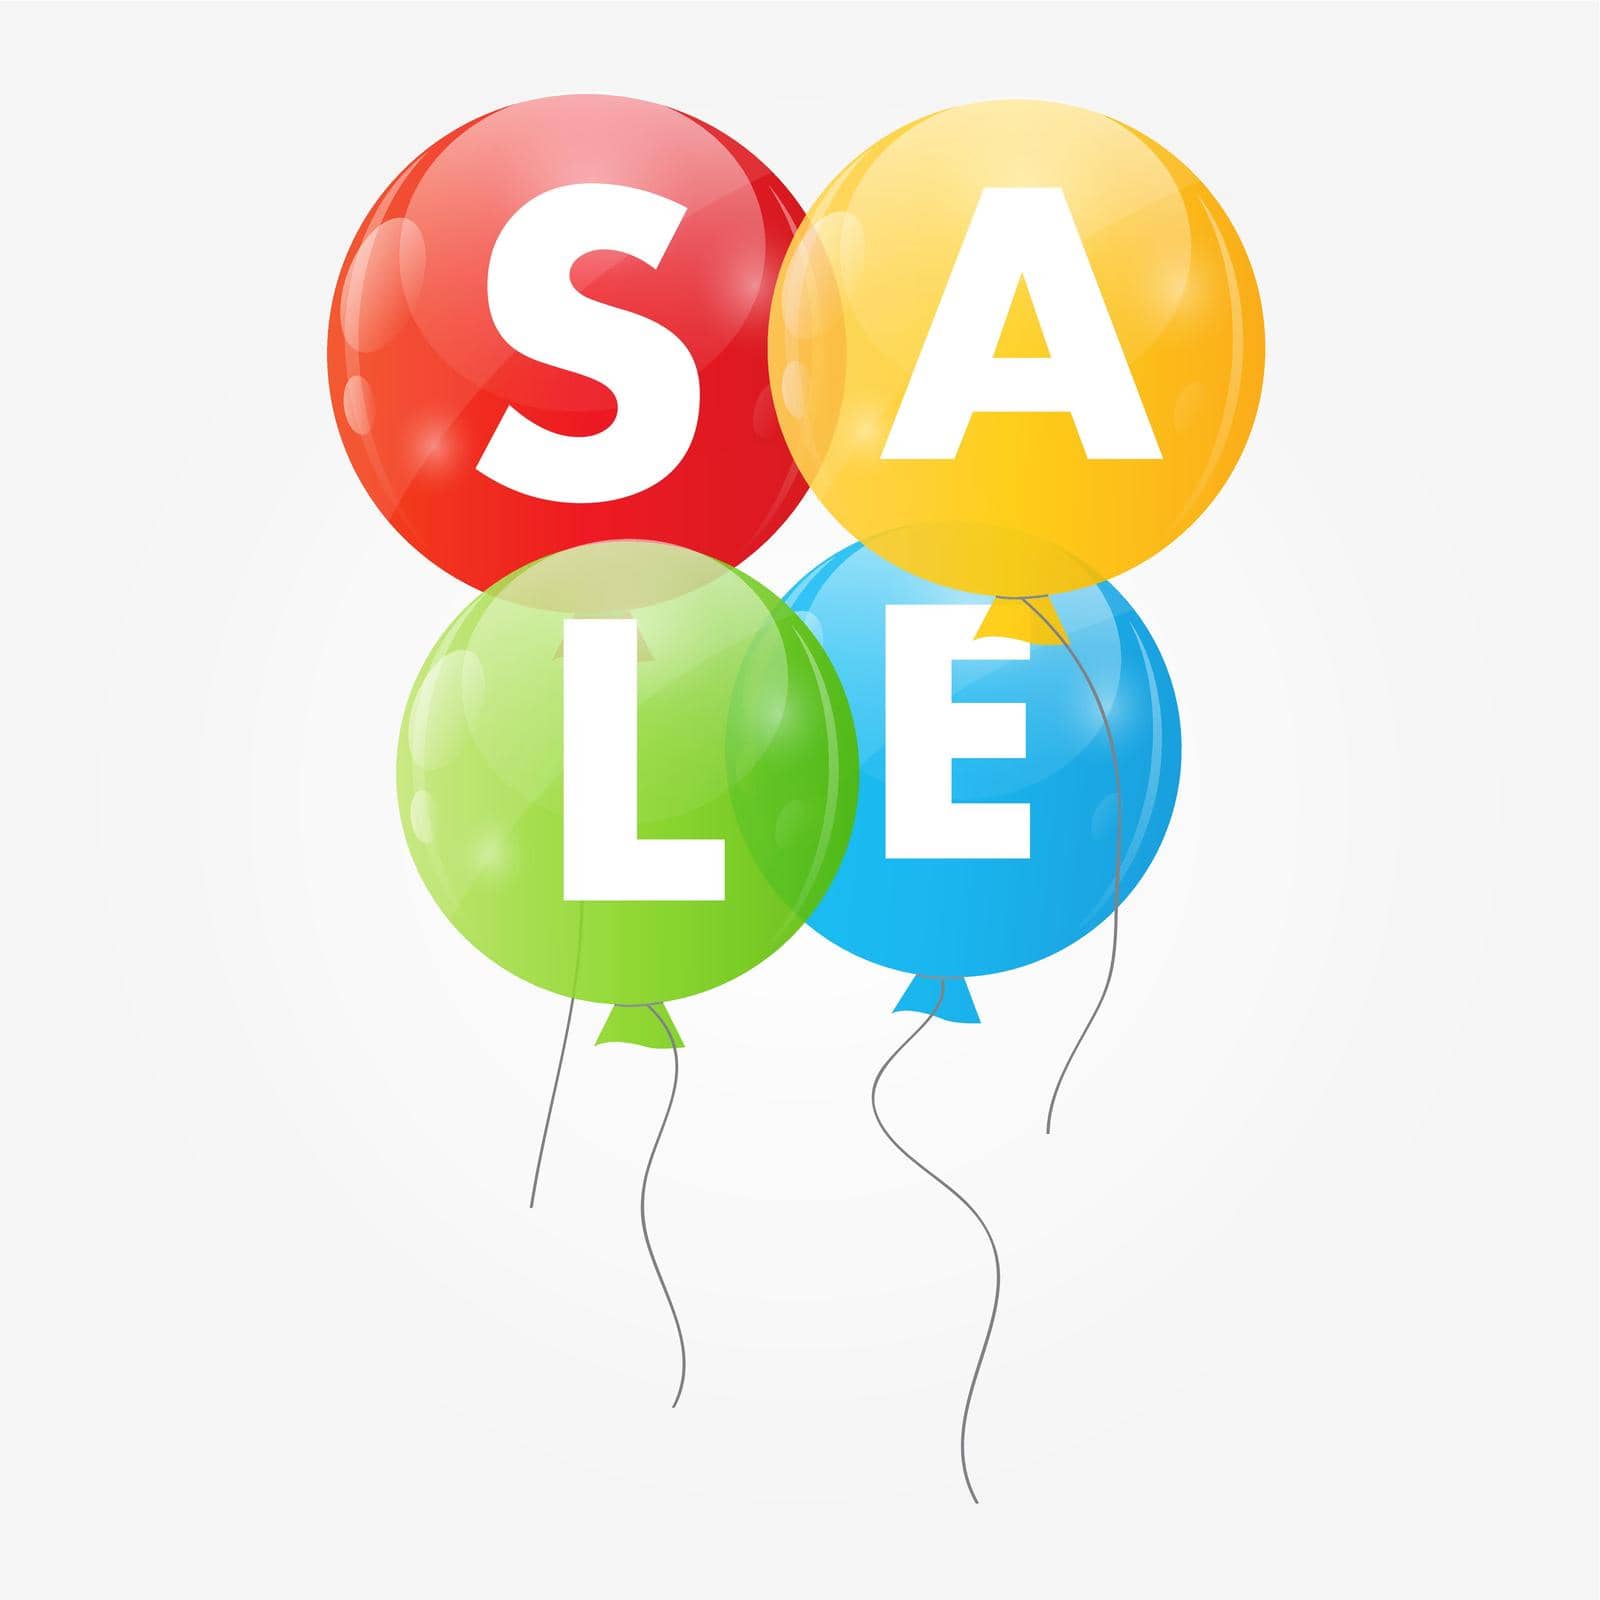 Color Glossy Balloons Sale Concept of Discount. Vector Illustration.
